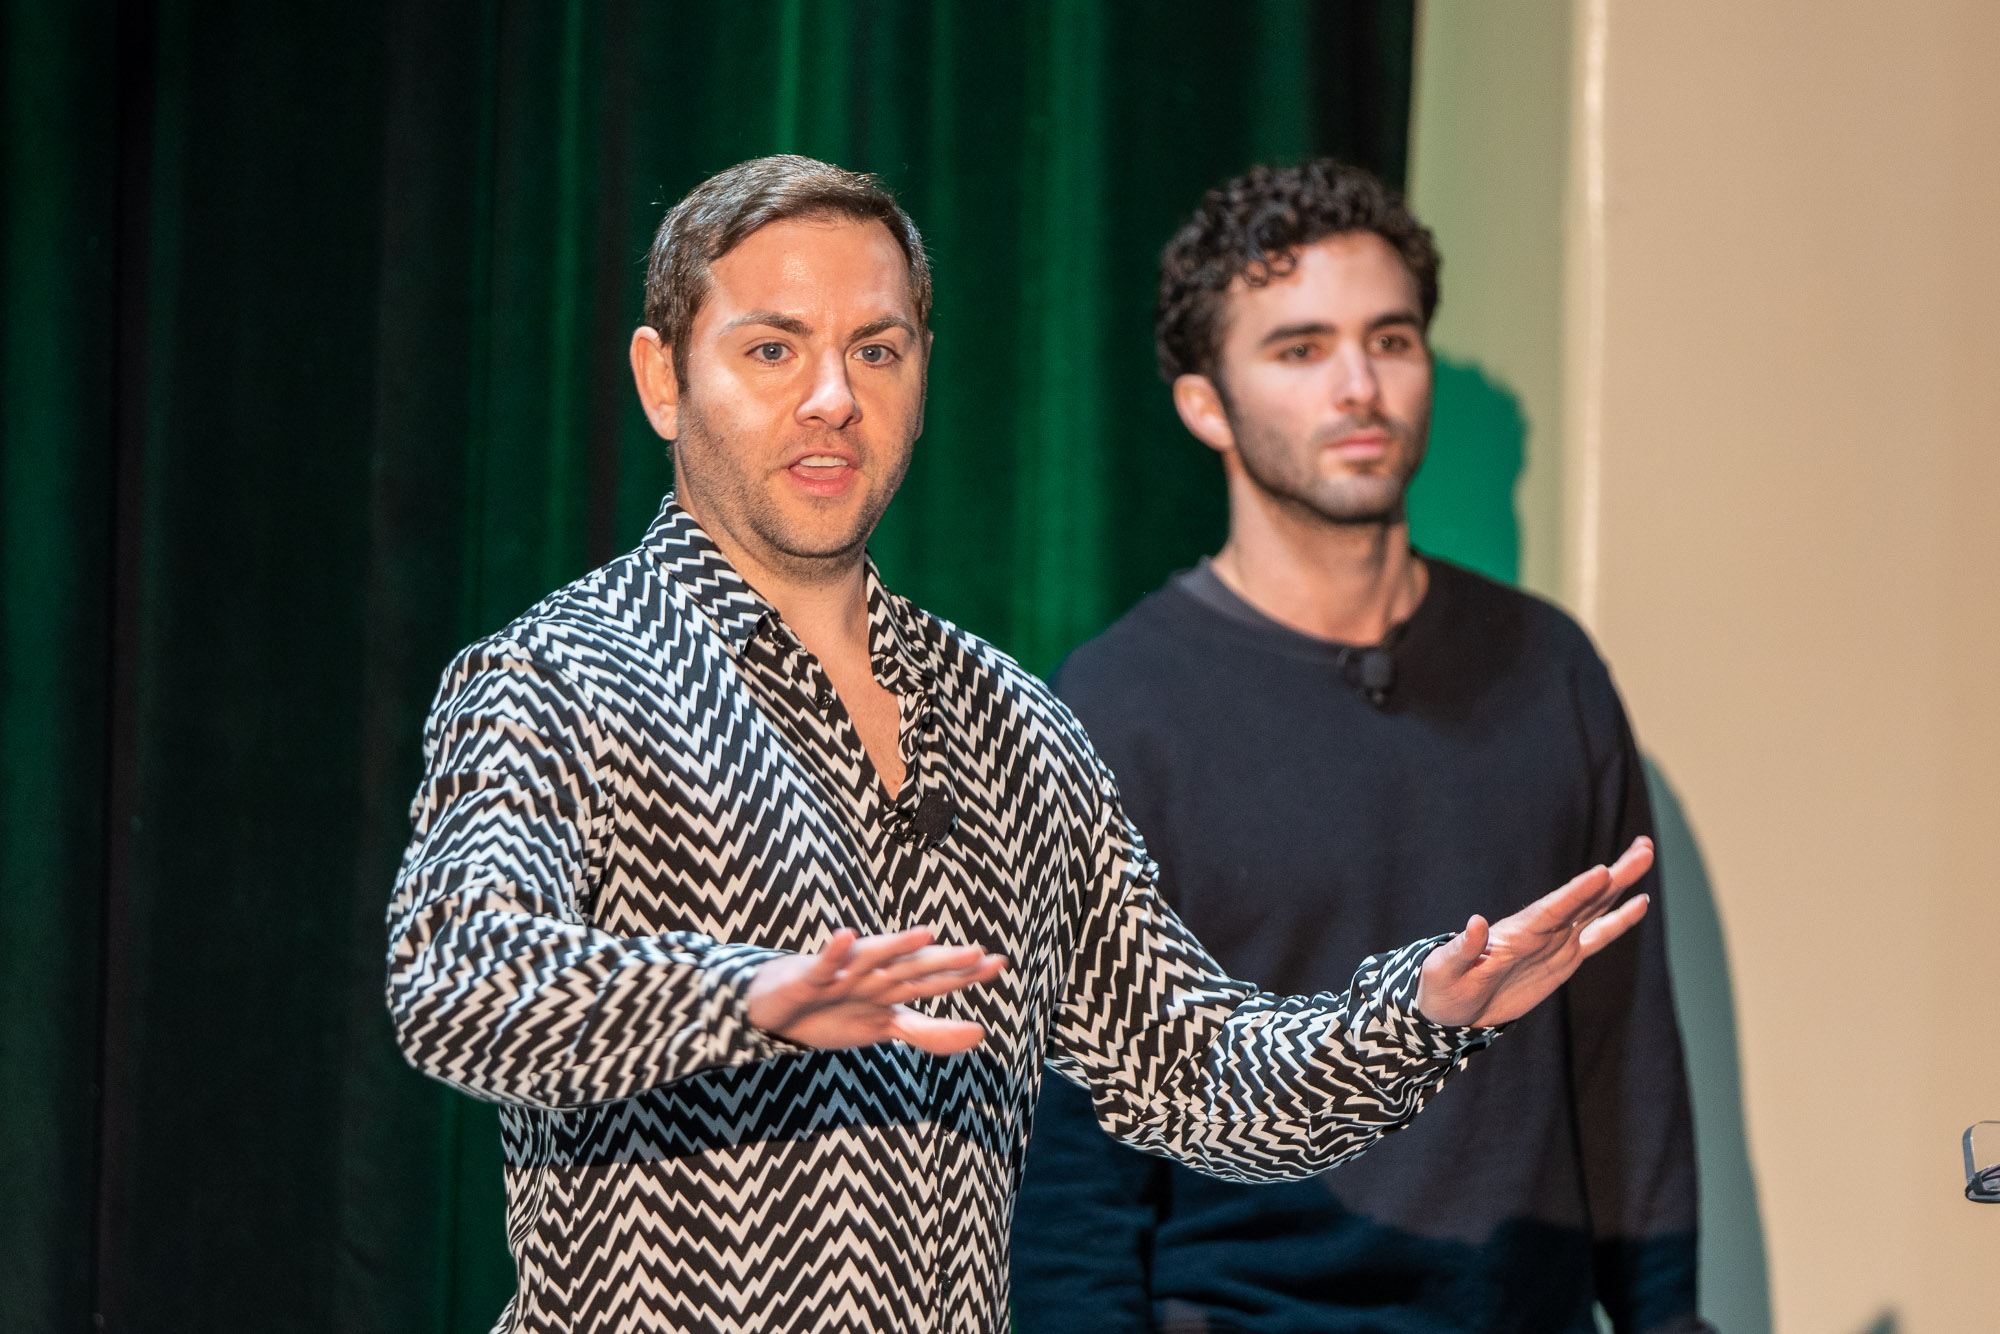 Josh Machiz, Partner at Redpoint, and Rashad Assir, Head of Content at Redpoint, talk about "How to turn your startup into a social star" at TechCrunch Early Stage in Boston on April 20, 2023. Image Credit: Haje Jan Kamps / TechCrunch